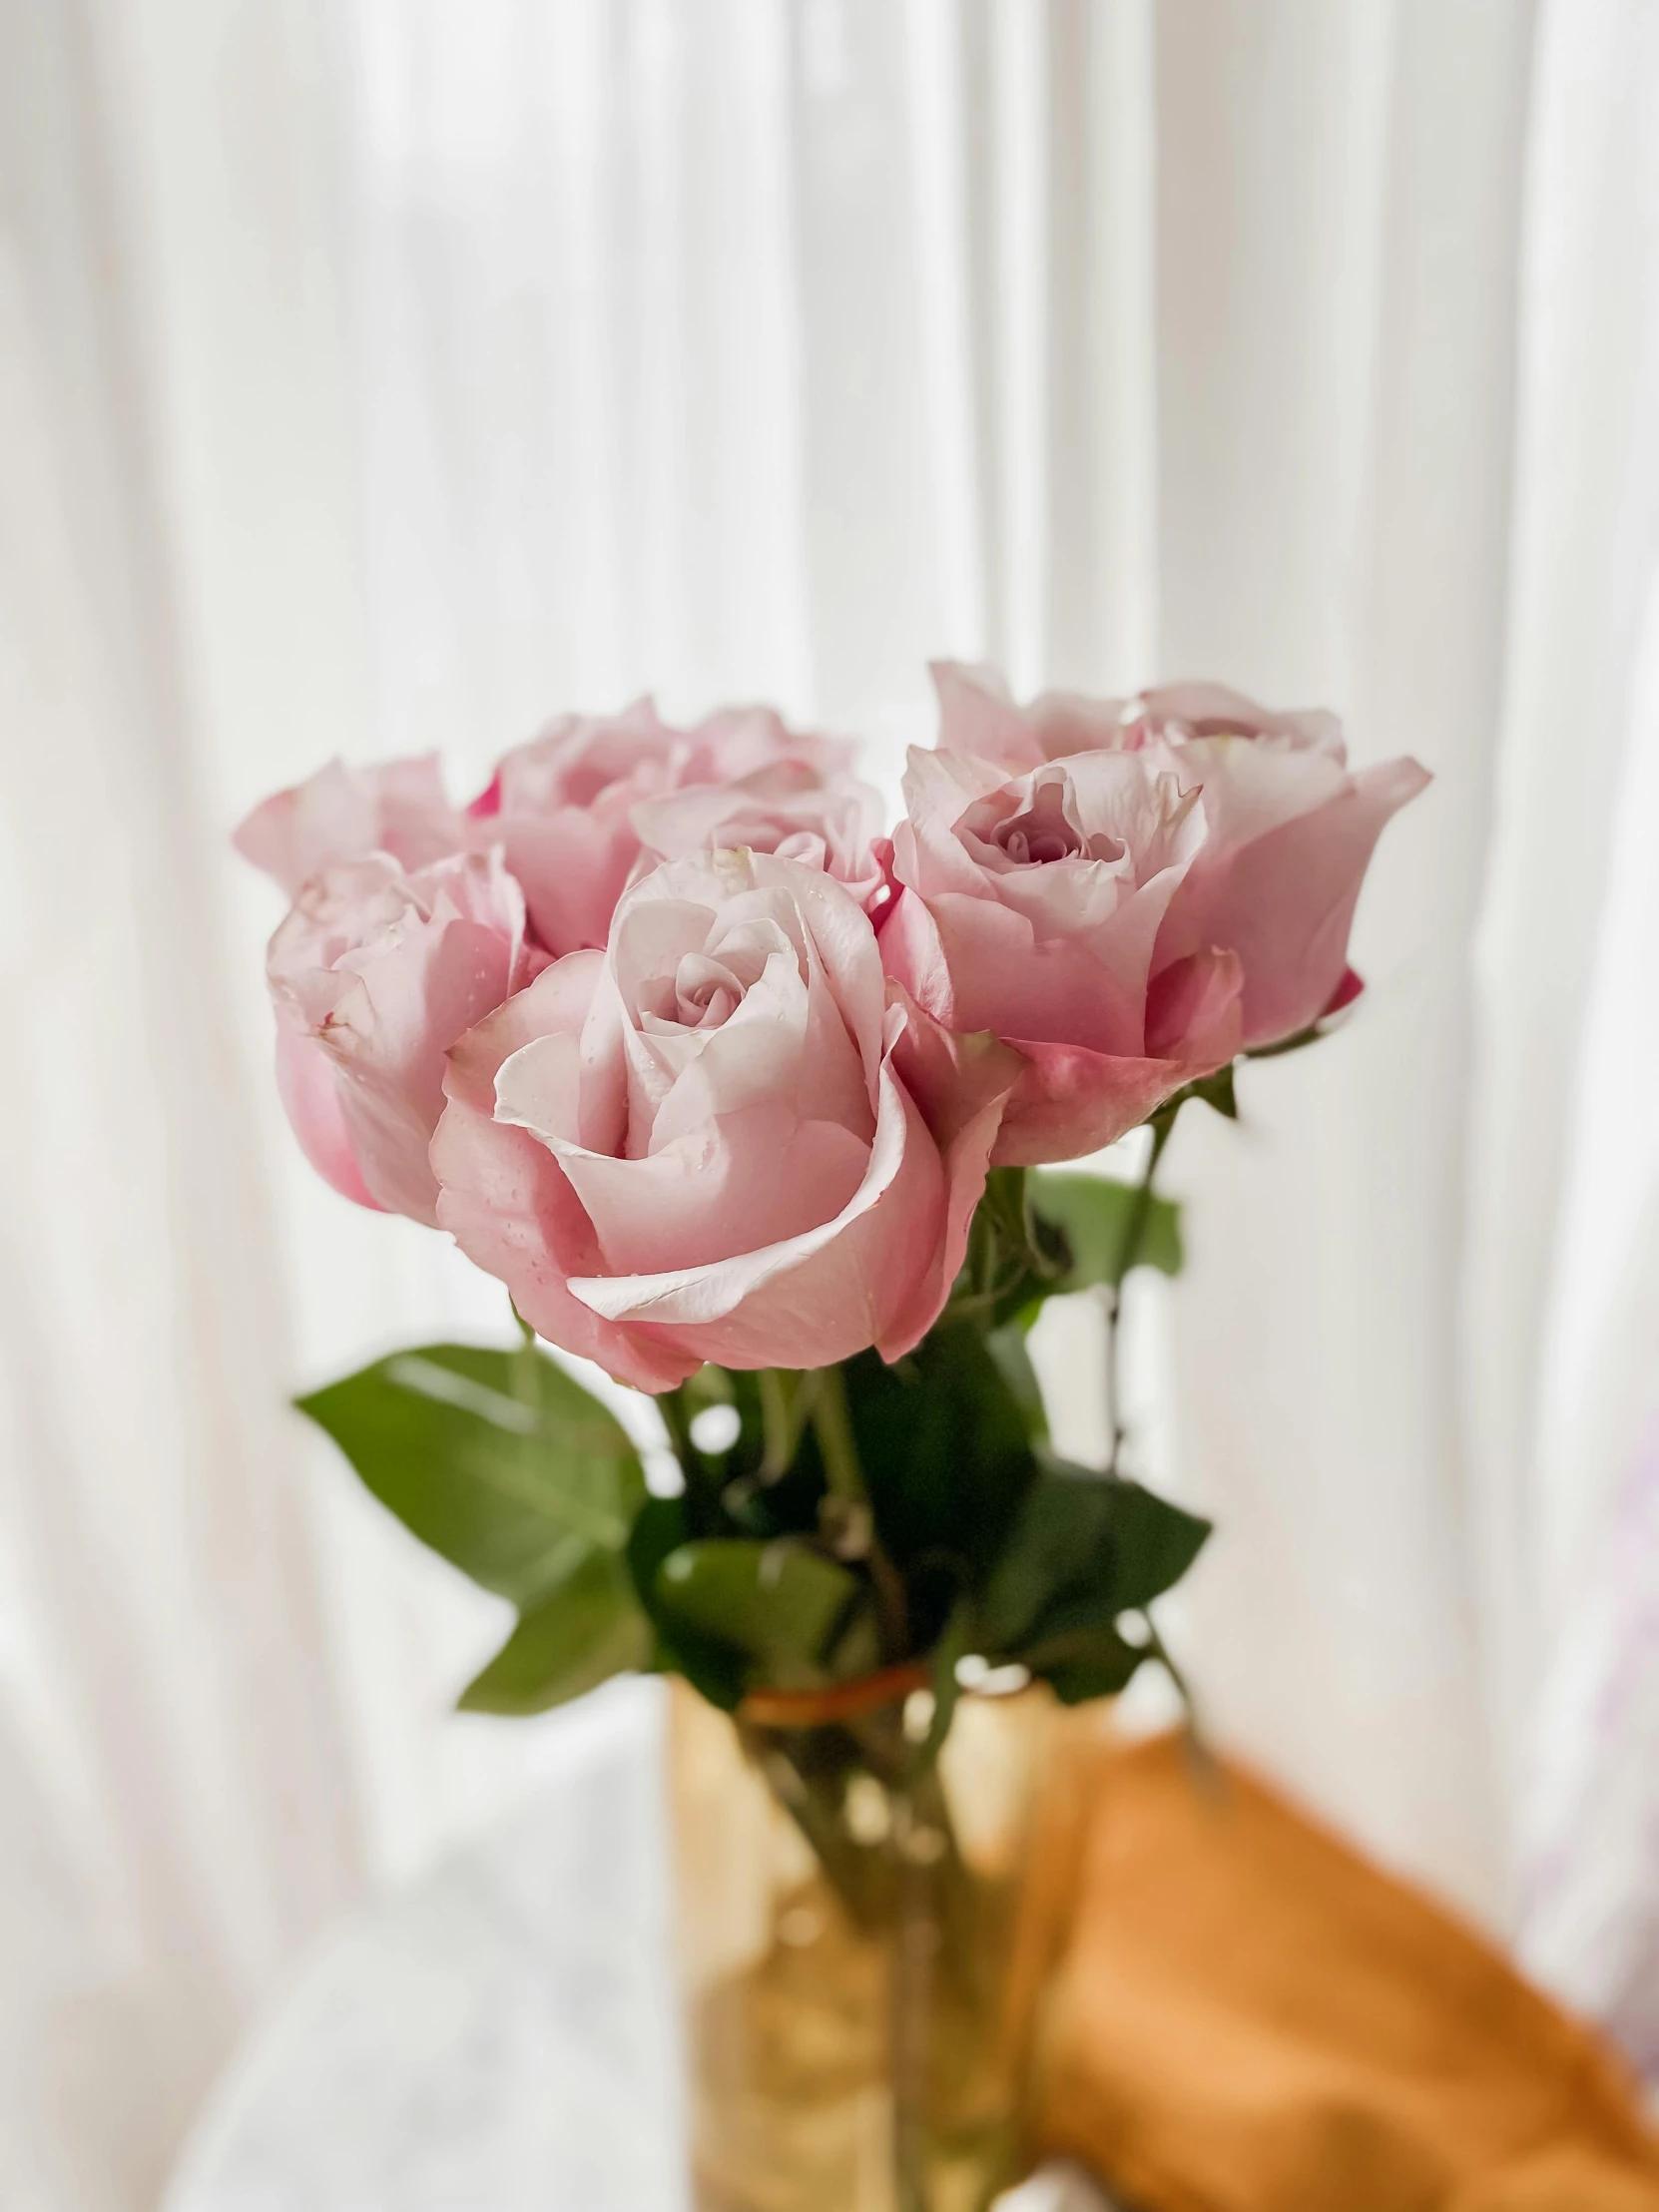 the pink roses are blooming out from the center of the vase